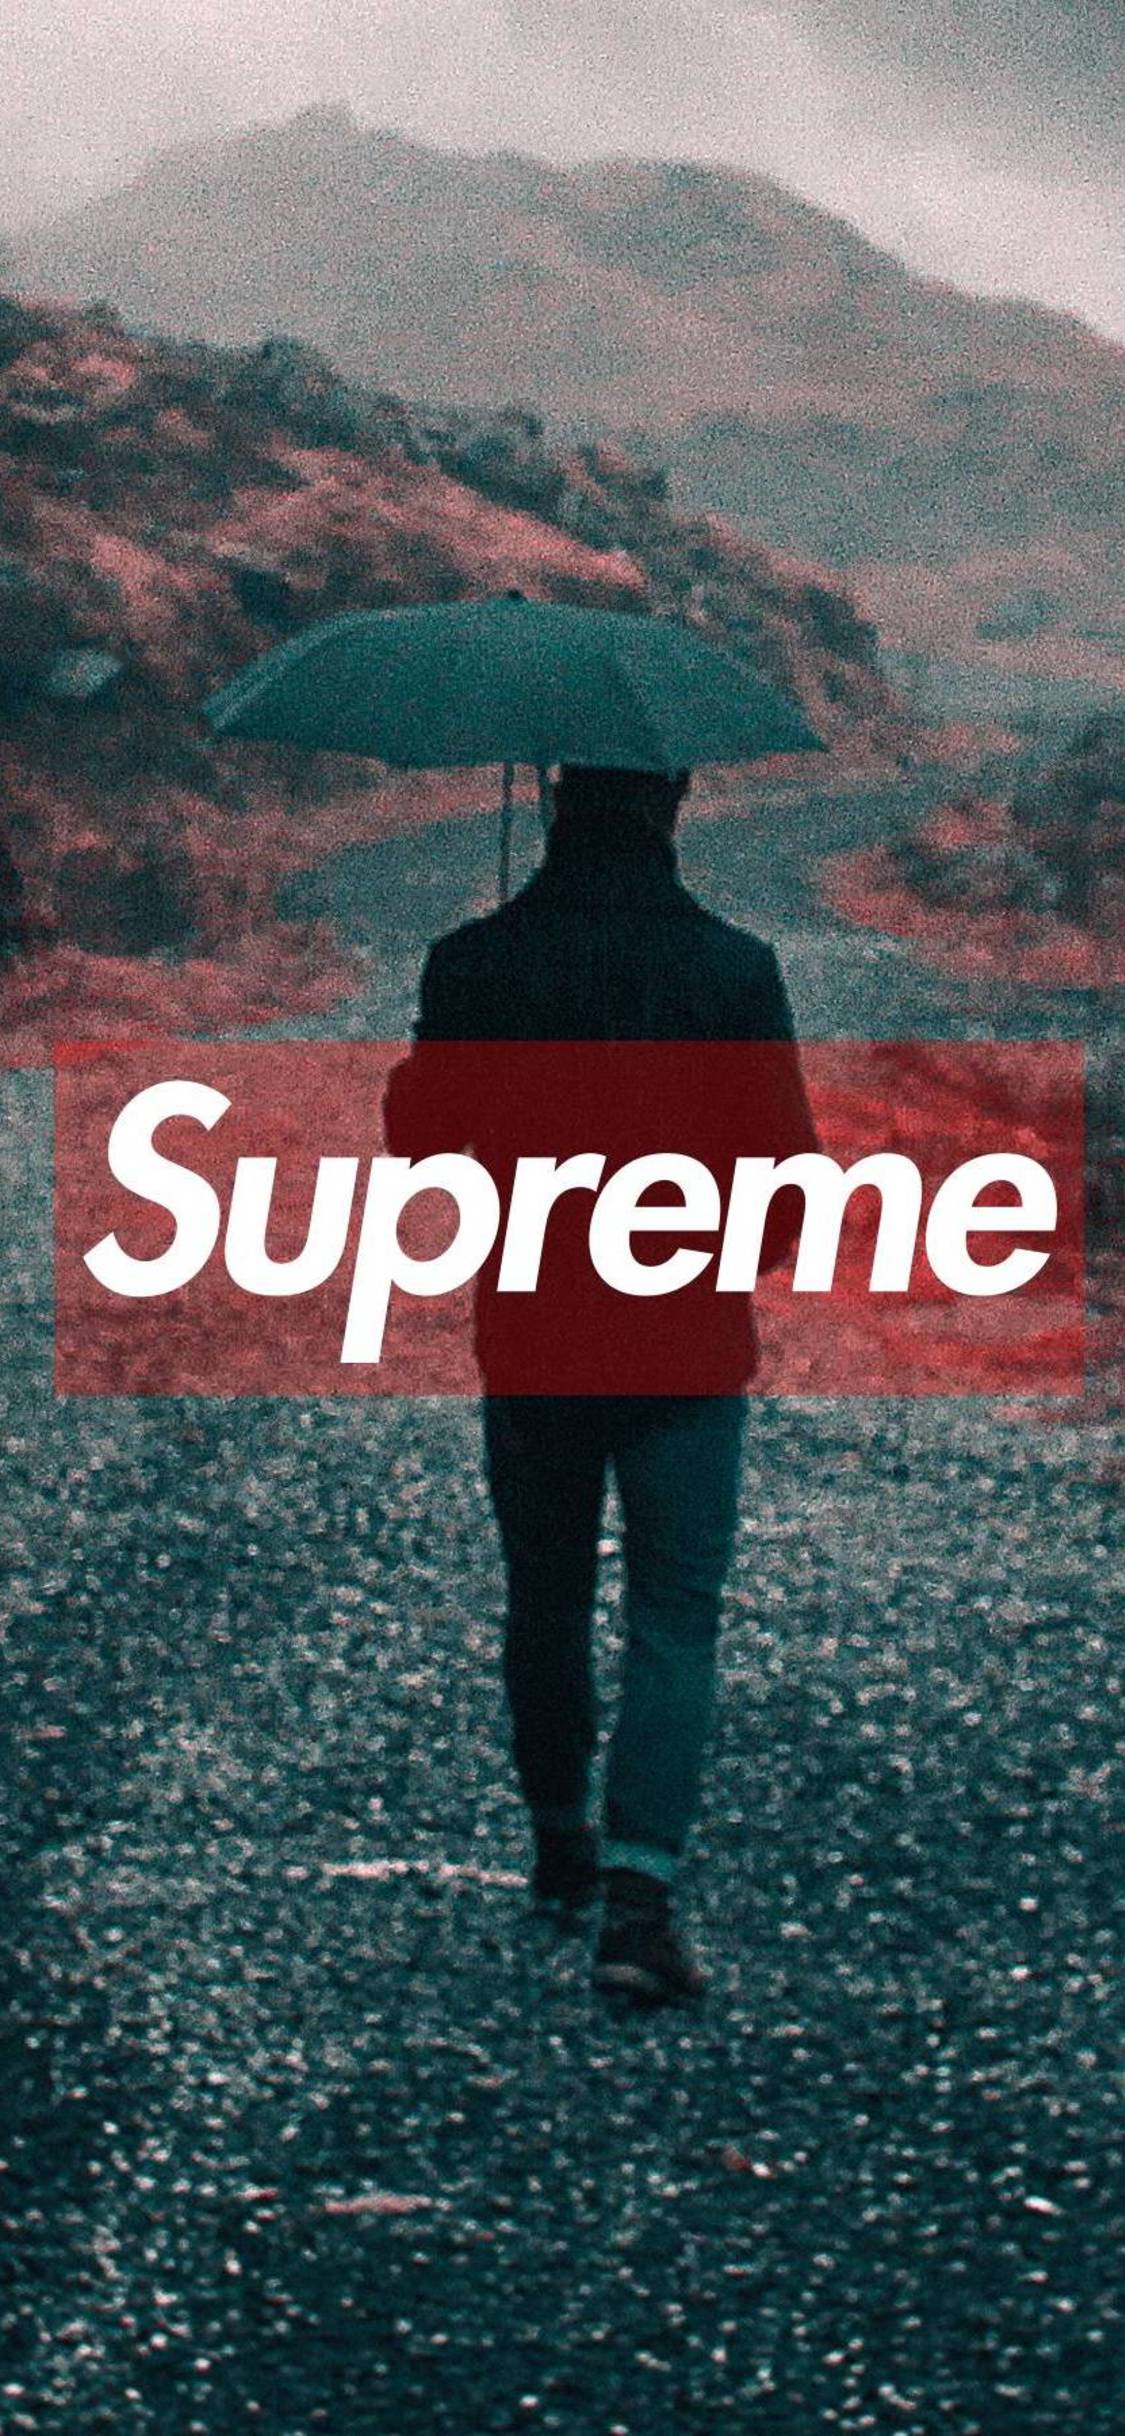 Supreme Iphone X Wallpapers Top Free Supreme Iphone X Backgrounds Wallpaperaccess